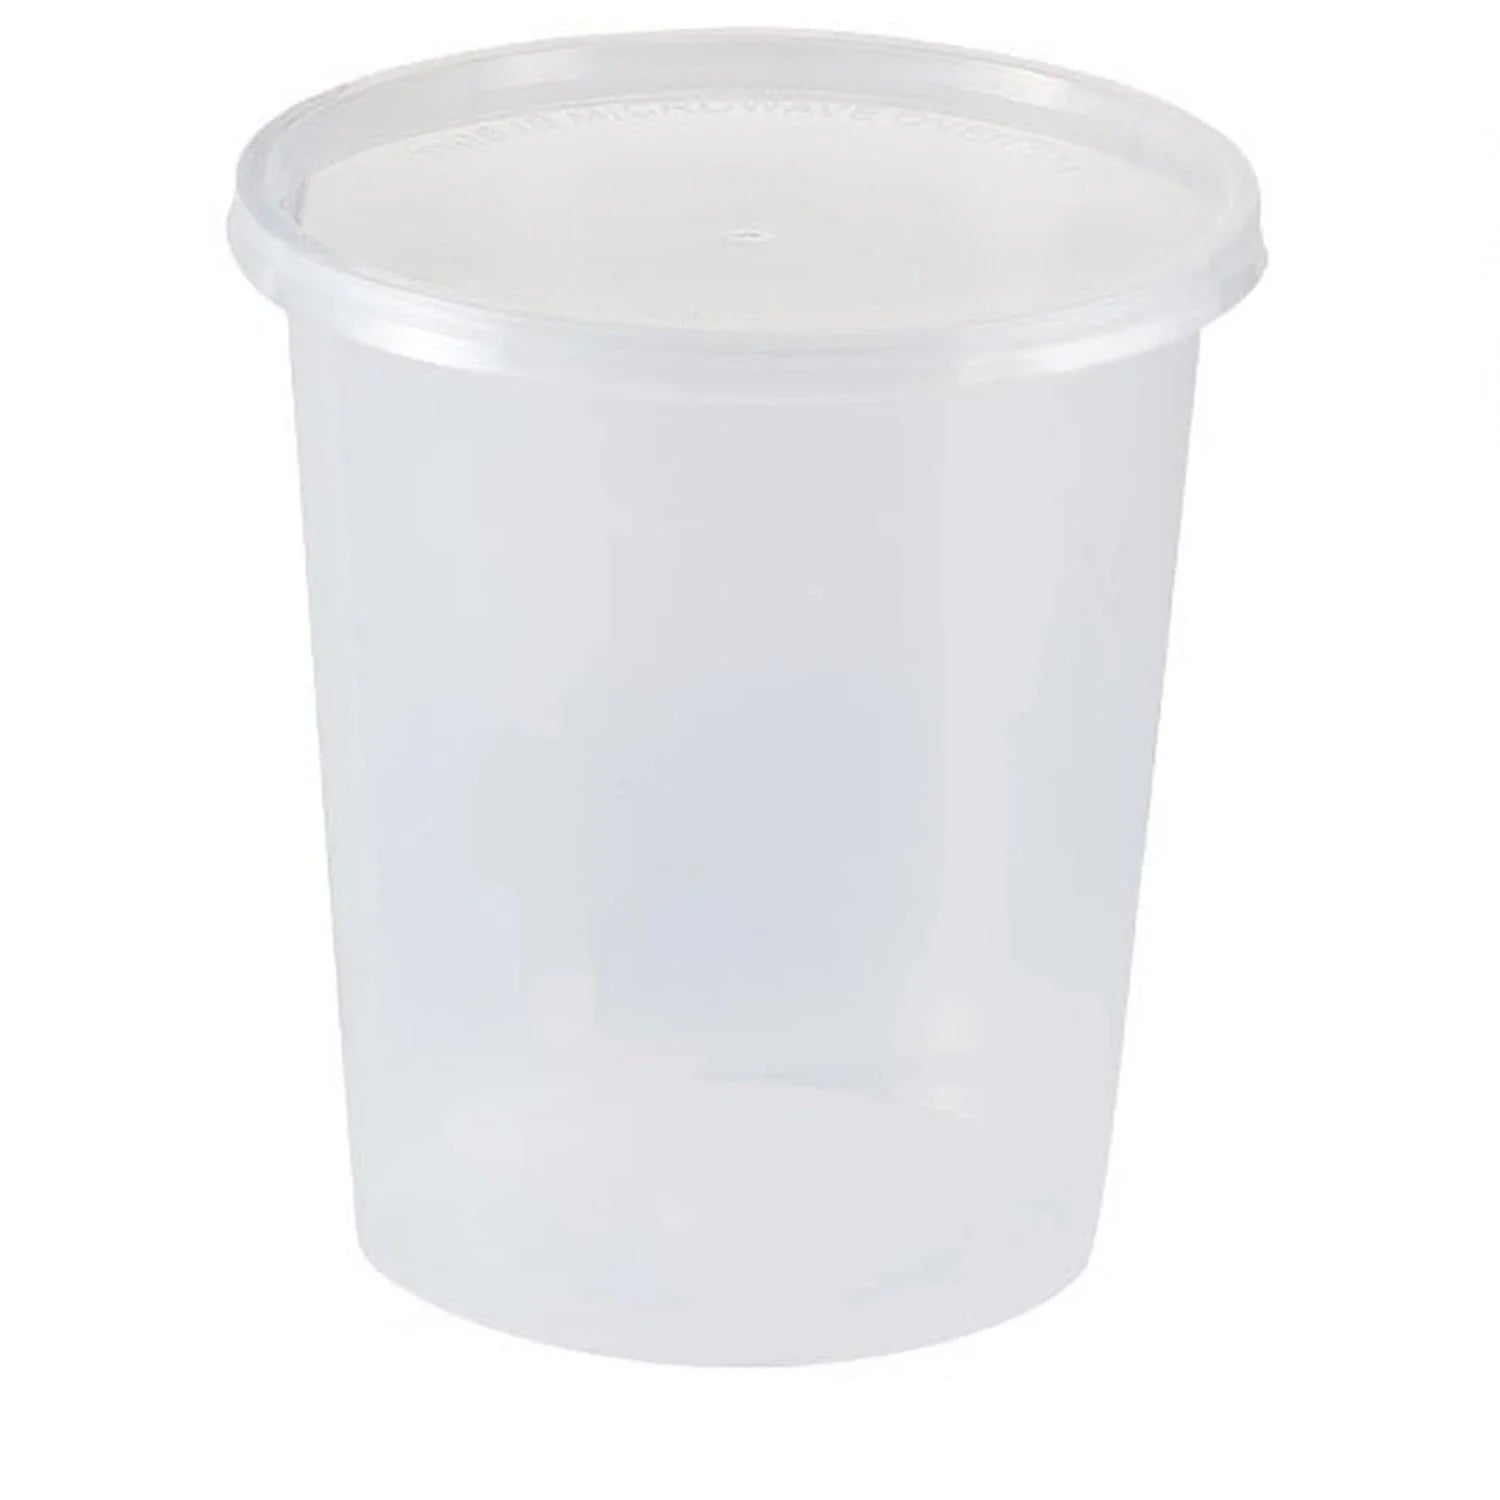 [54 PACK] 48oz Round Plastic Reusable Storage Containers with